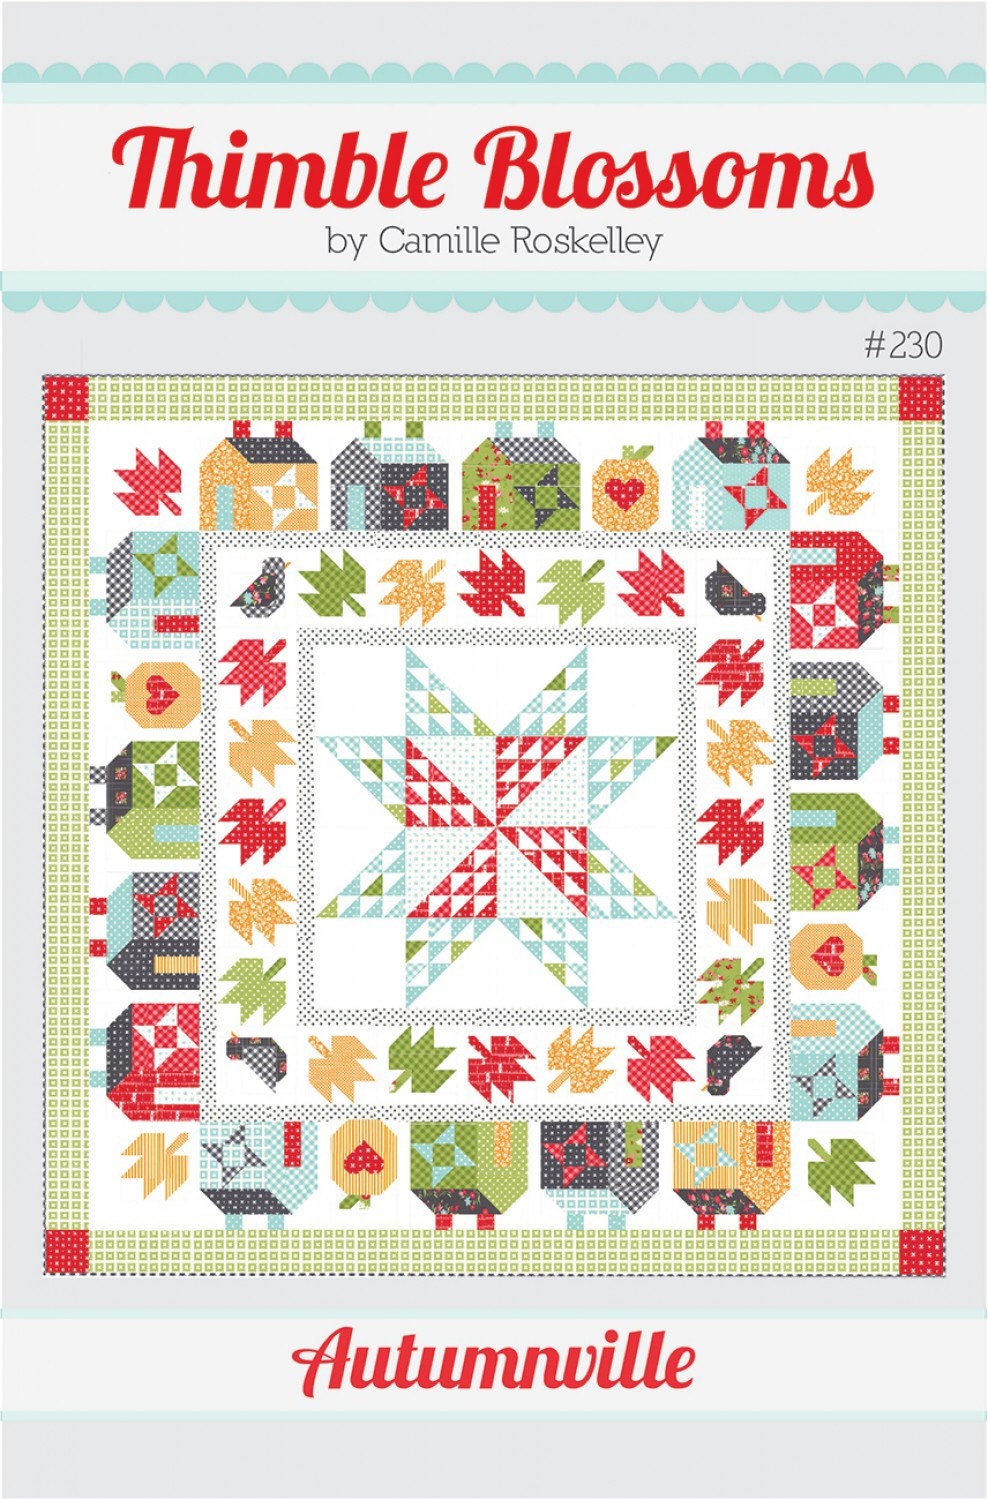 Autumnville Quilt Pattern - Thimble Blossoms - Camille Roskelley - Fat Quarter Friendly - 79”x 79”